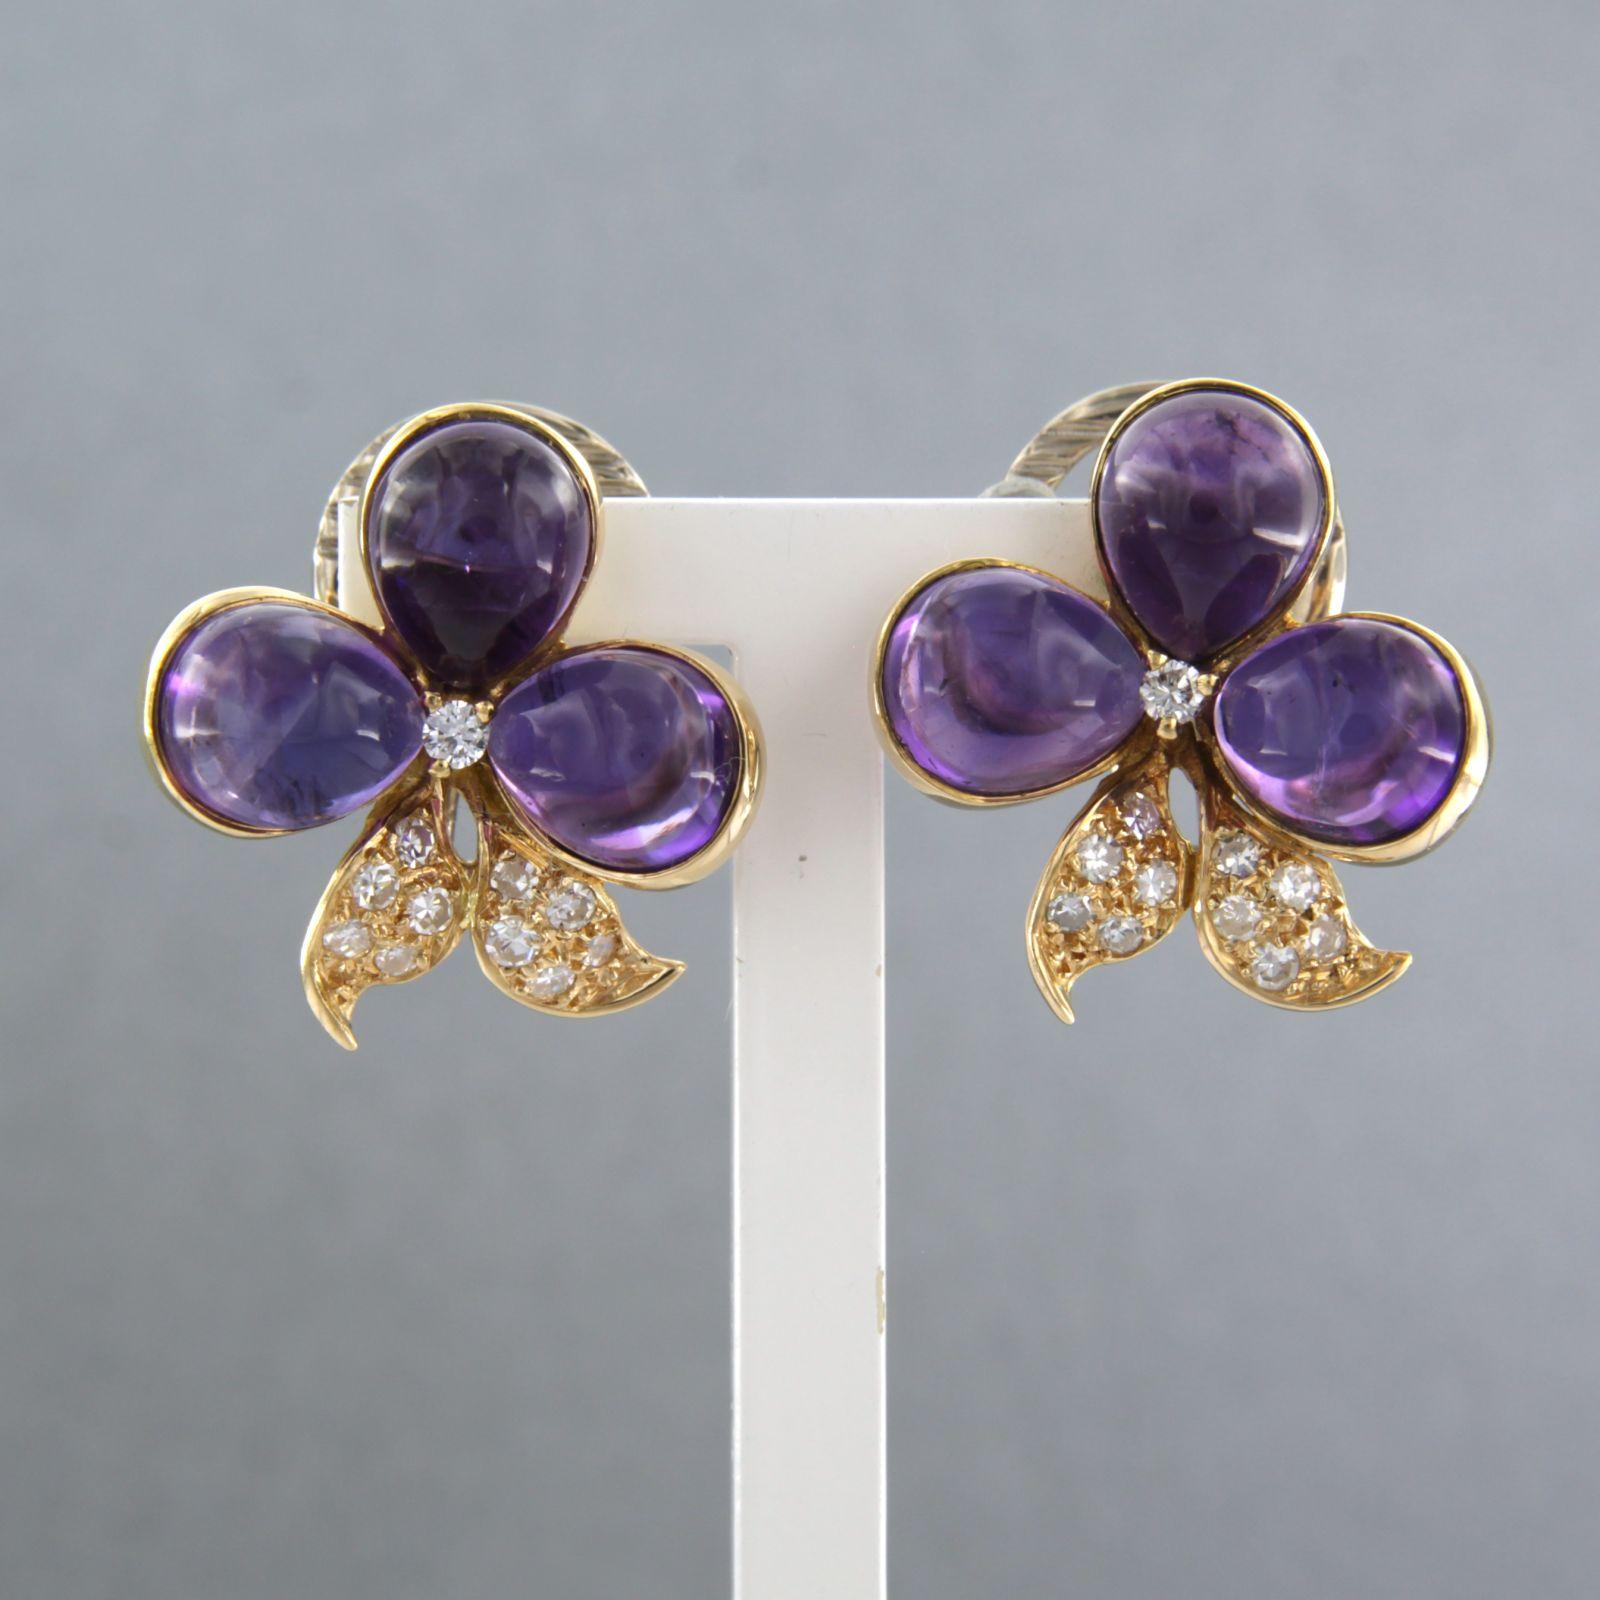 18k bicolor gold ear clips set with amethyst and brilliant and single cut diamonds. 0.25ct - G/H - VS/SI

detailed description:

the size of the ear clips is 2.0 cm by 2.0 cm wide

weight 11.3 grams

set with

- 6 x 7.8 mm x 7.0 mm drop shape